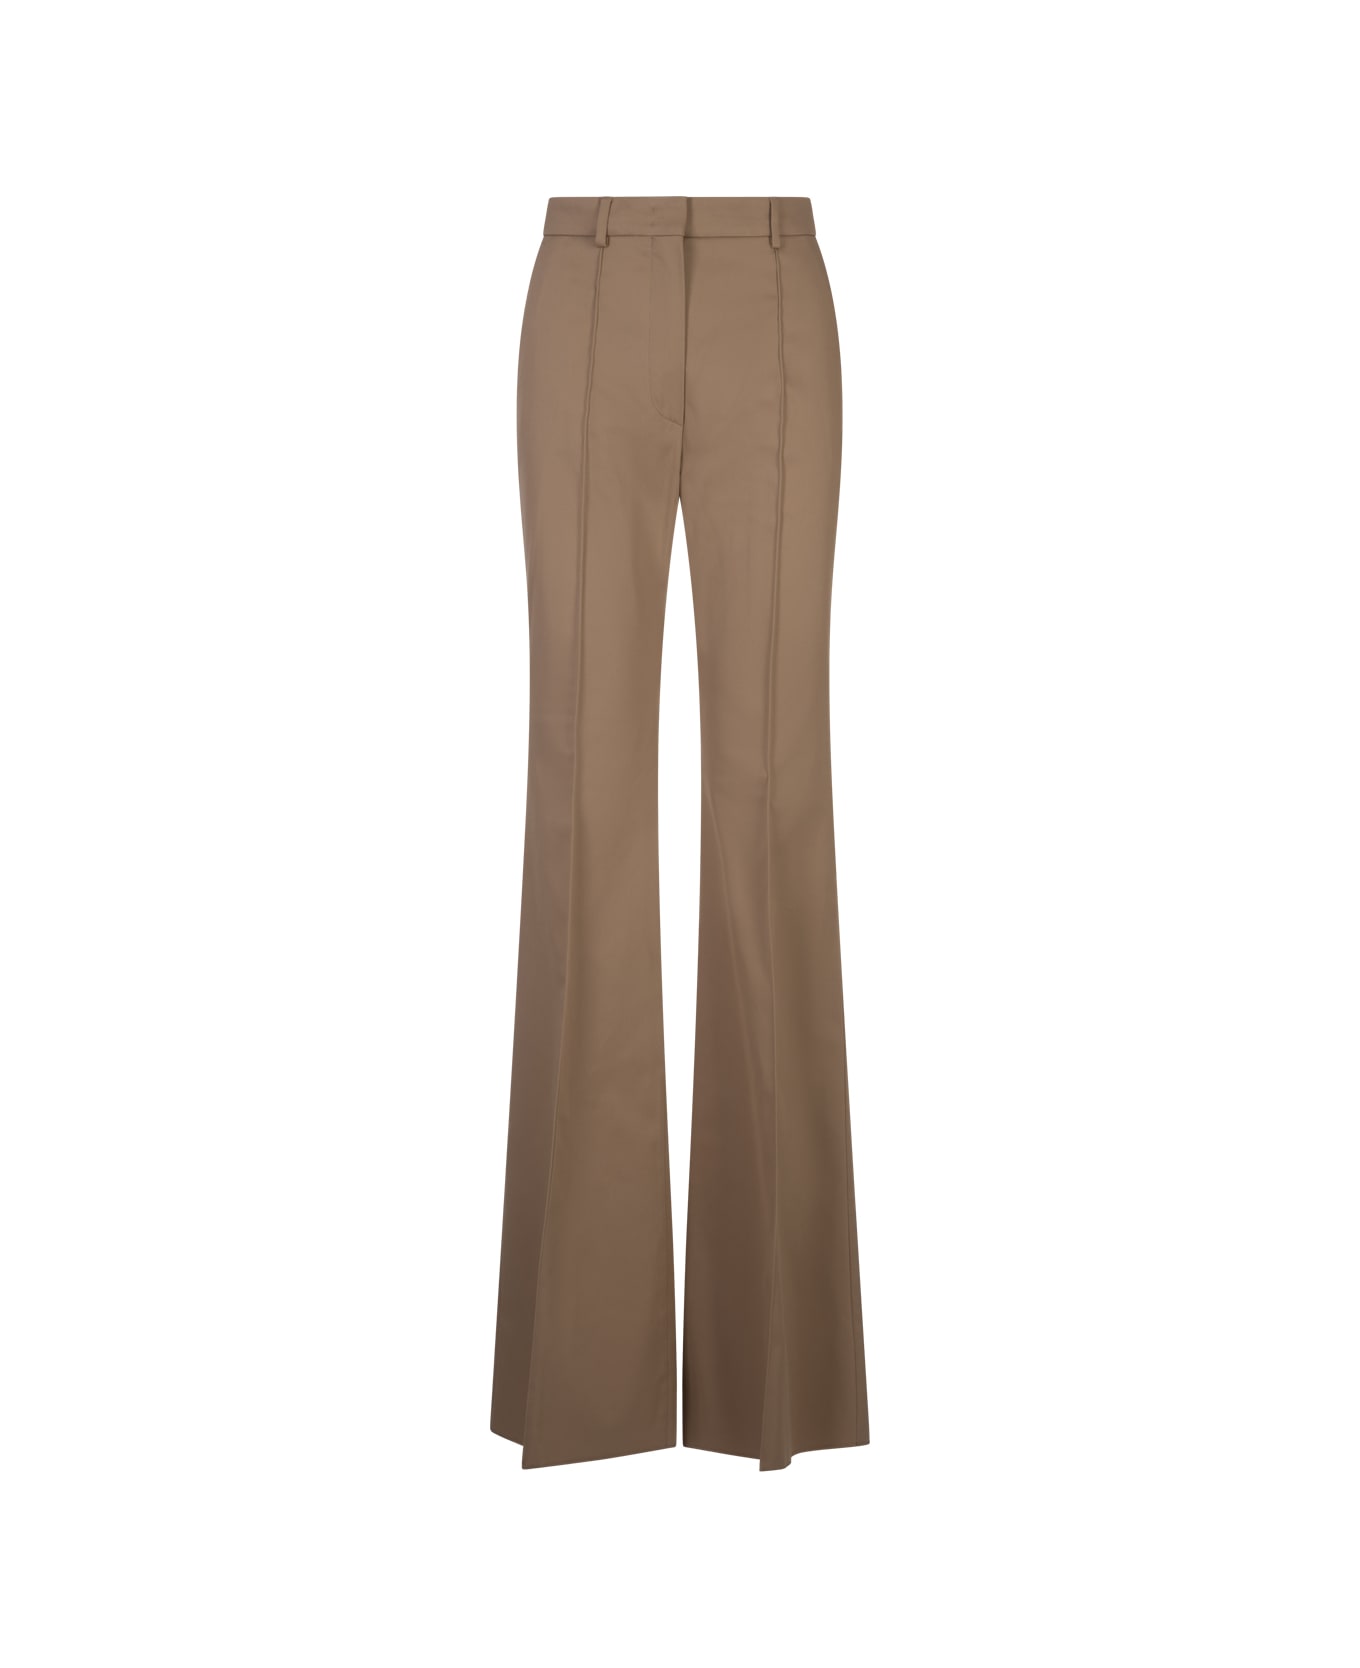 SportMax Beige Norcia Trousers - Brown ボトムス